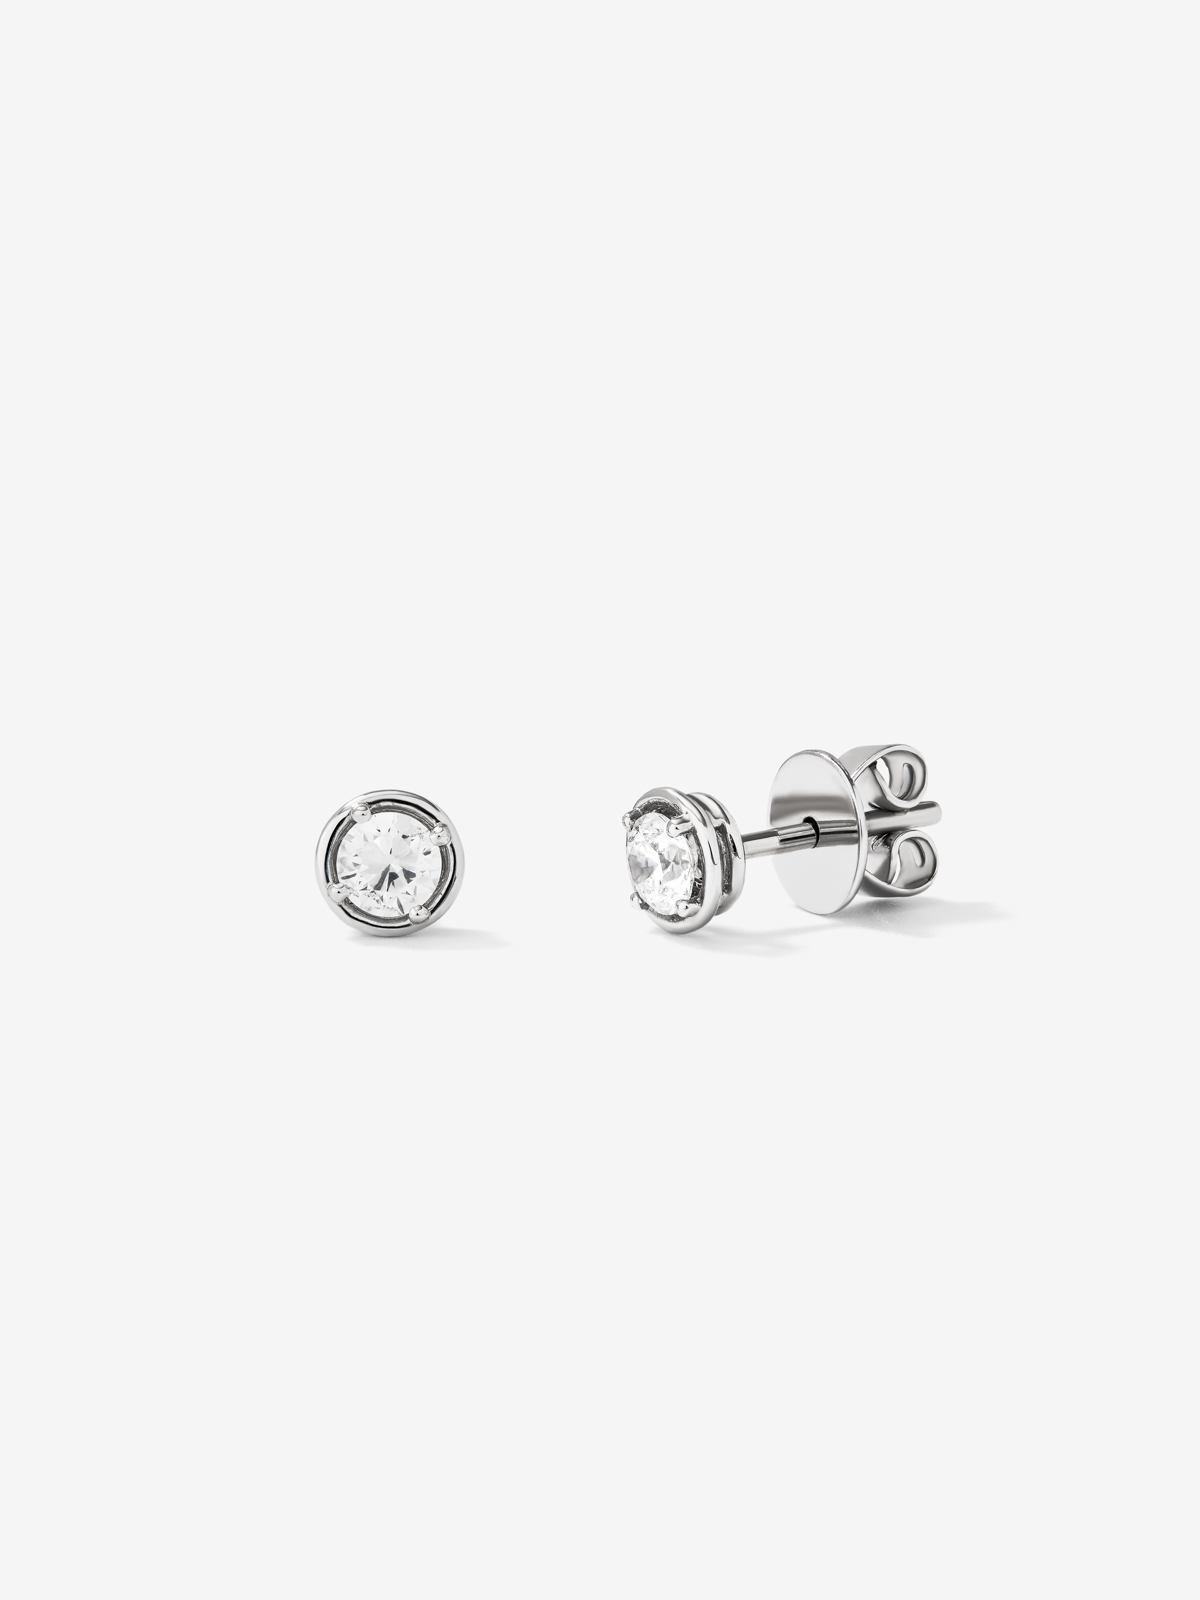 18K white gold earrings with solitaire diamond.